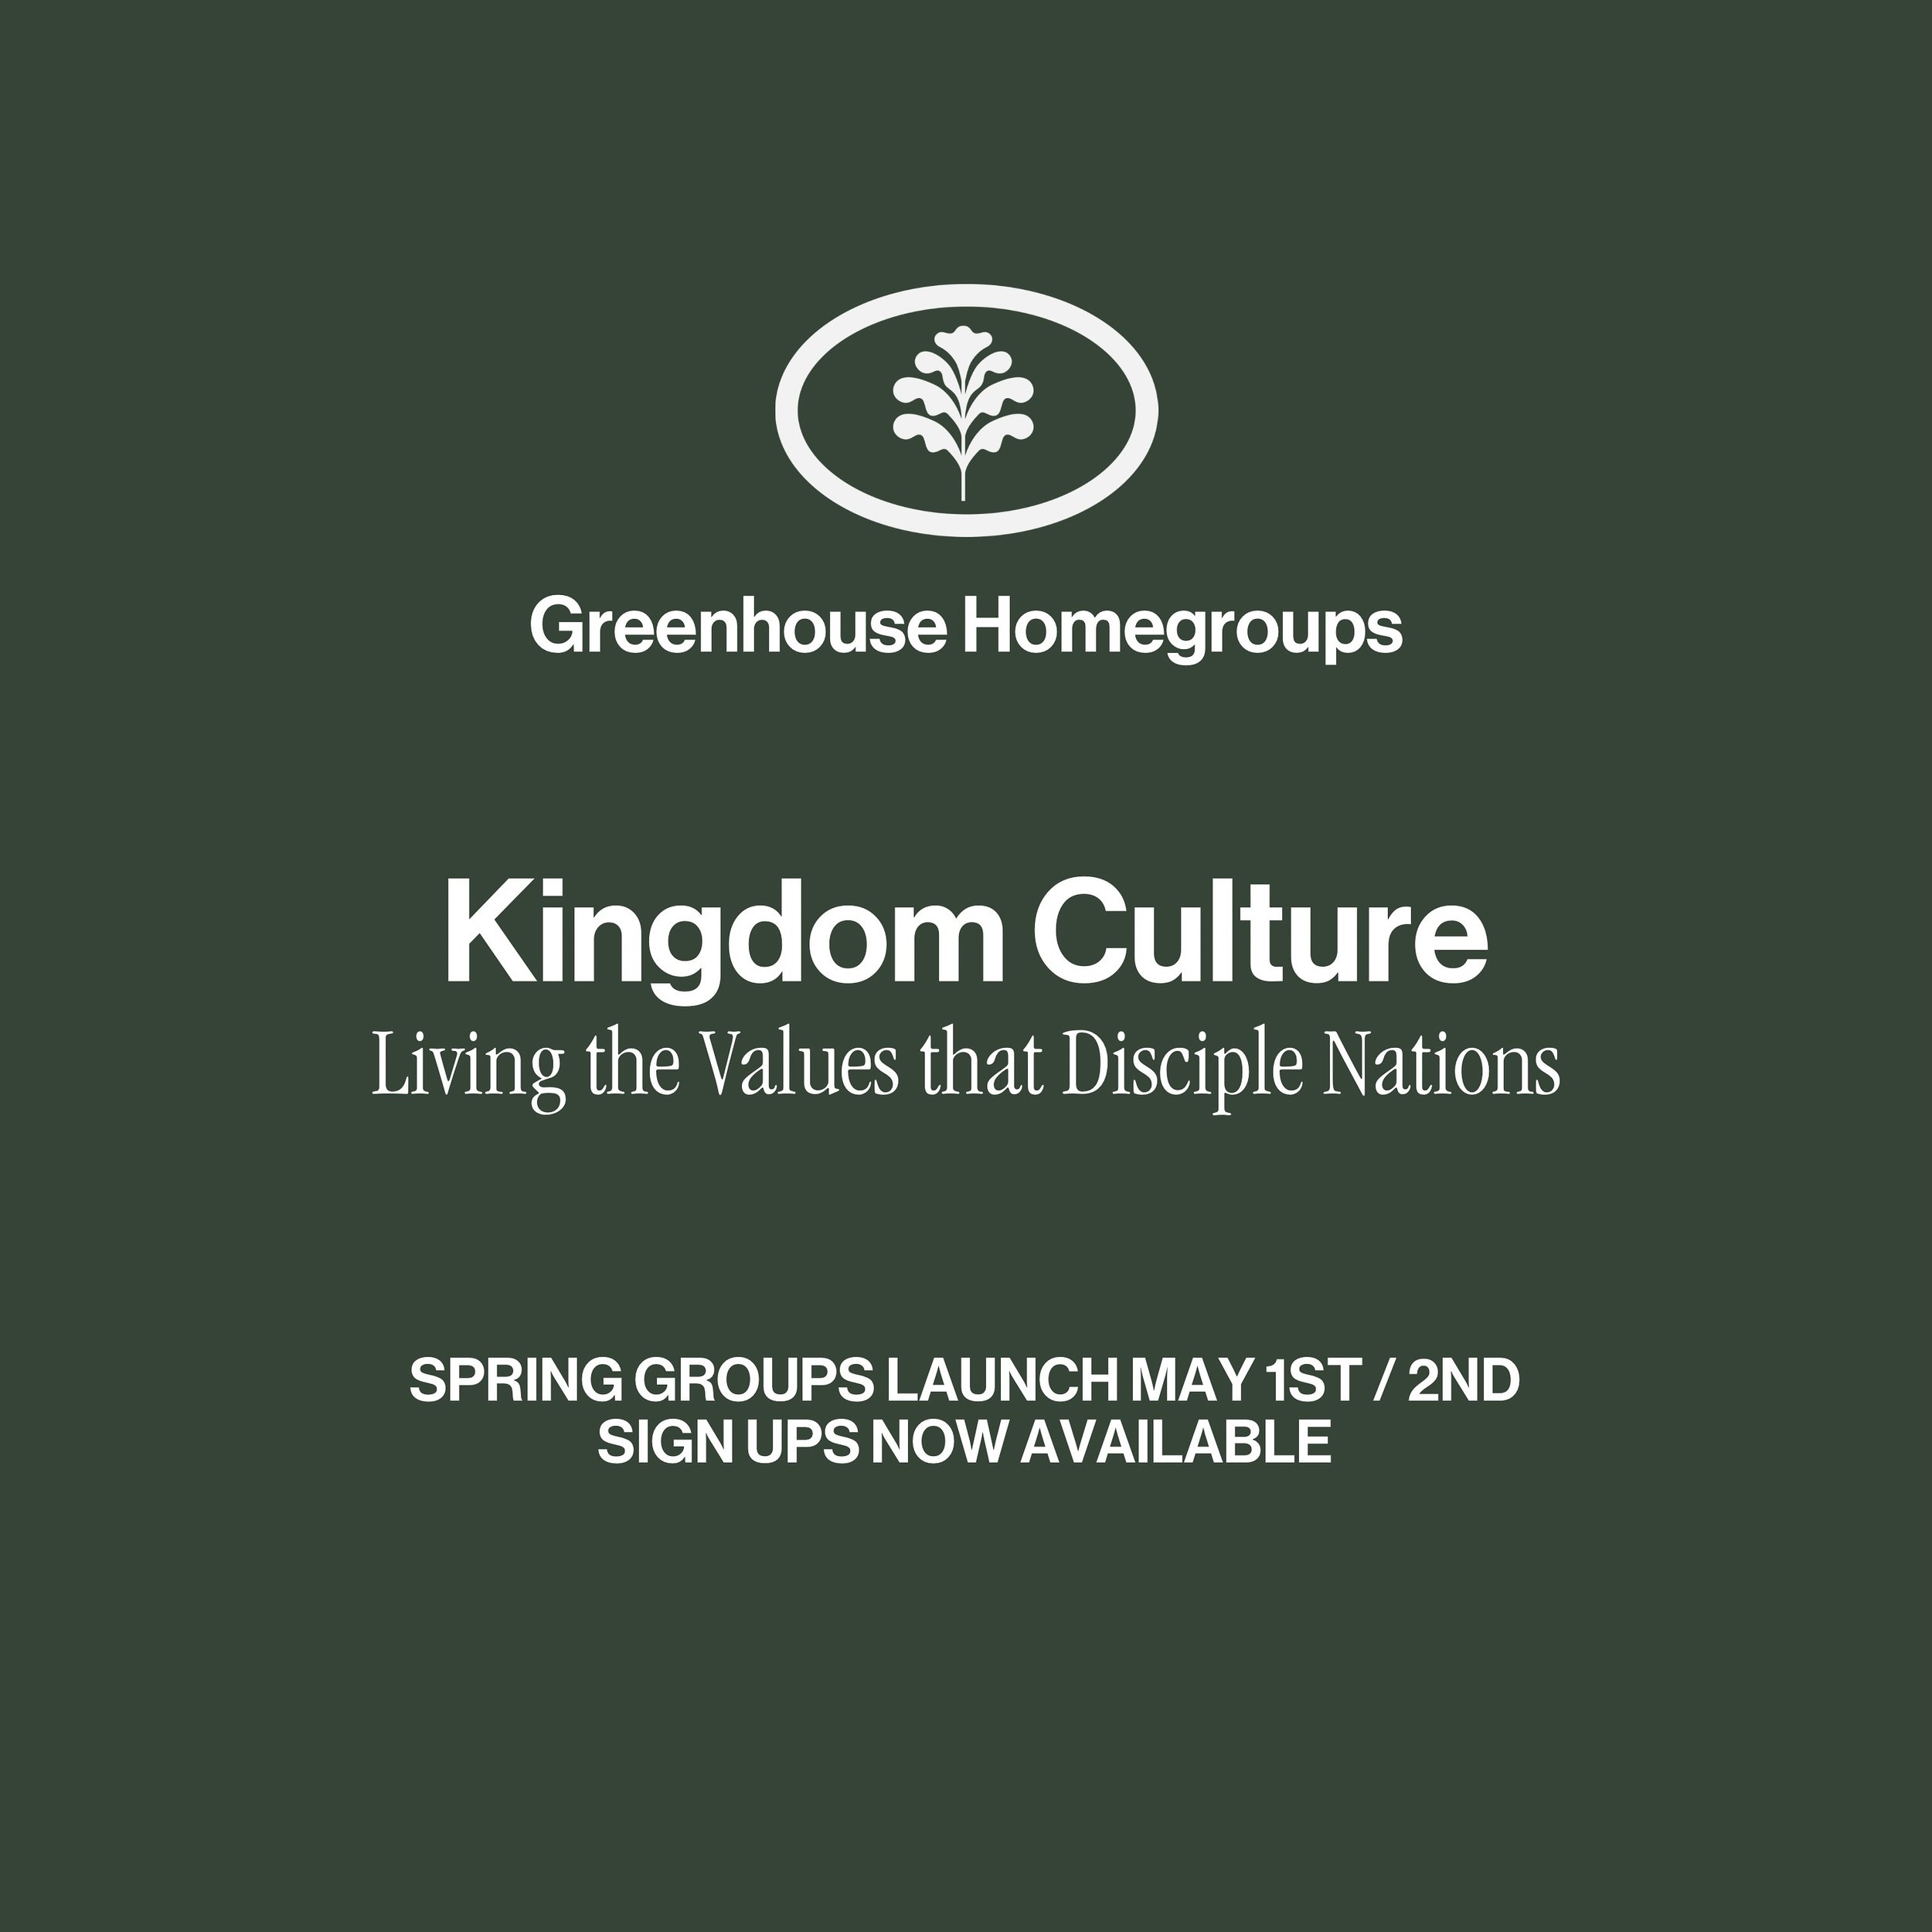 Sign ups are OPEN for Spring Greenhouse Homegroups! (Link in Bio)

This season we are going after cultural values of the Kingdom that will shape us&hellip; from &ldquo;Honor Affirms Value,&rdquo; &ldquo;Creating Healthy Family,&rdquo; &ldquo;Responsi